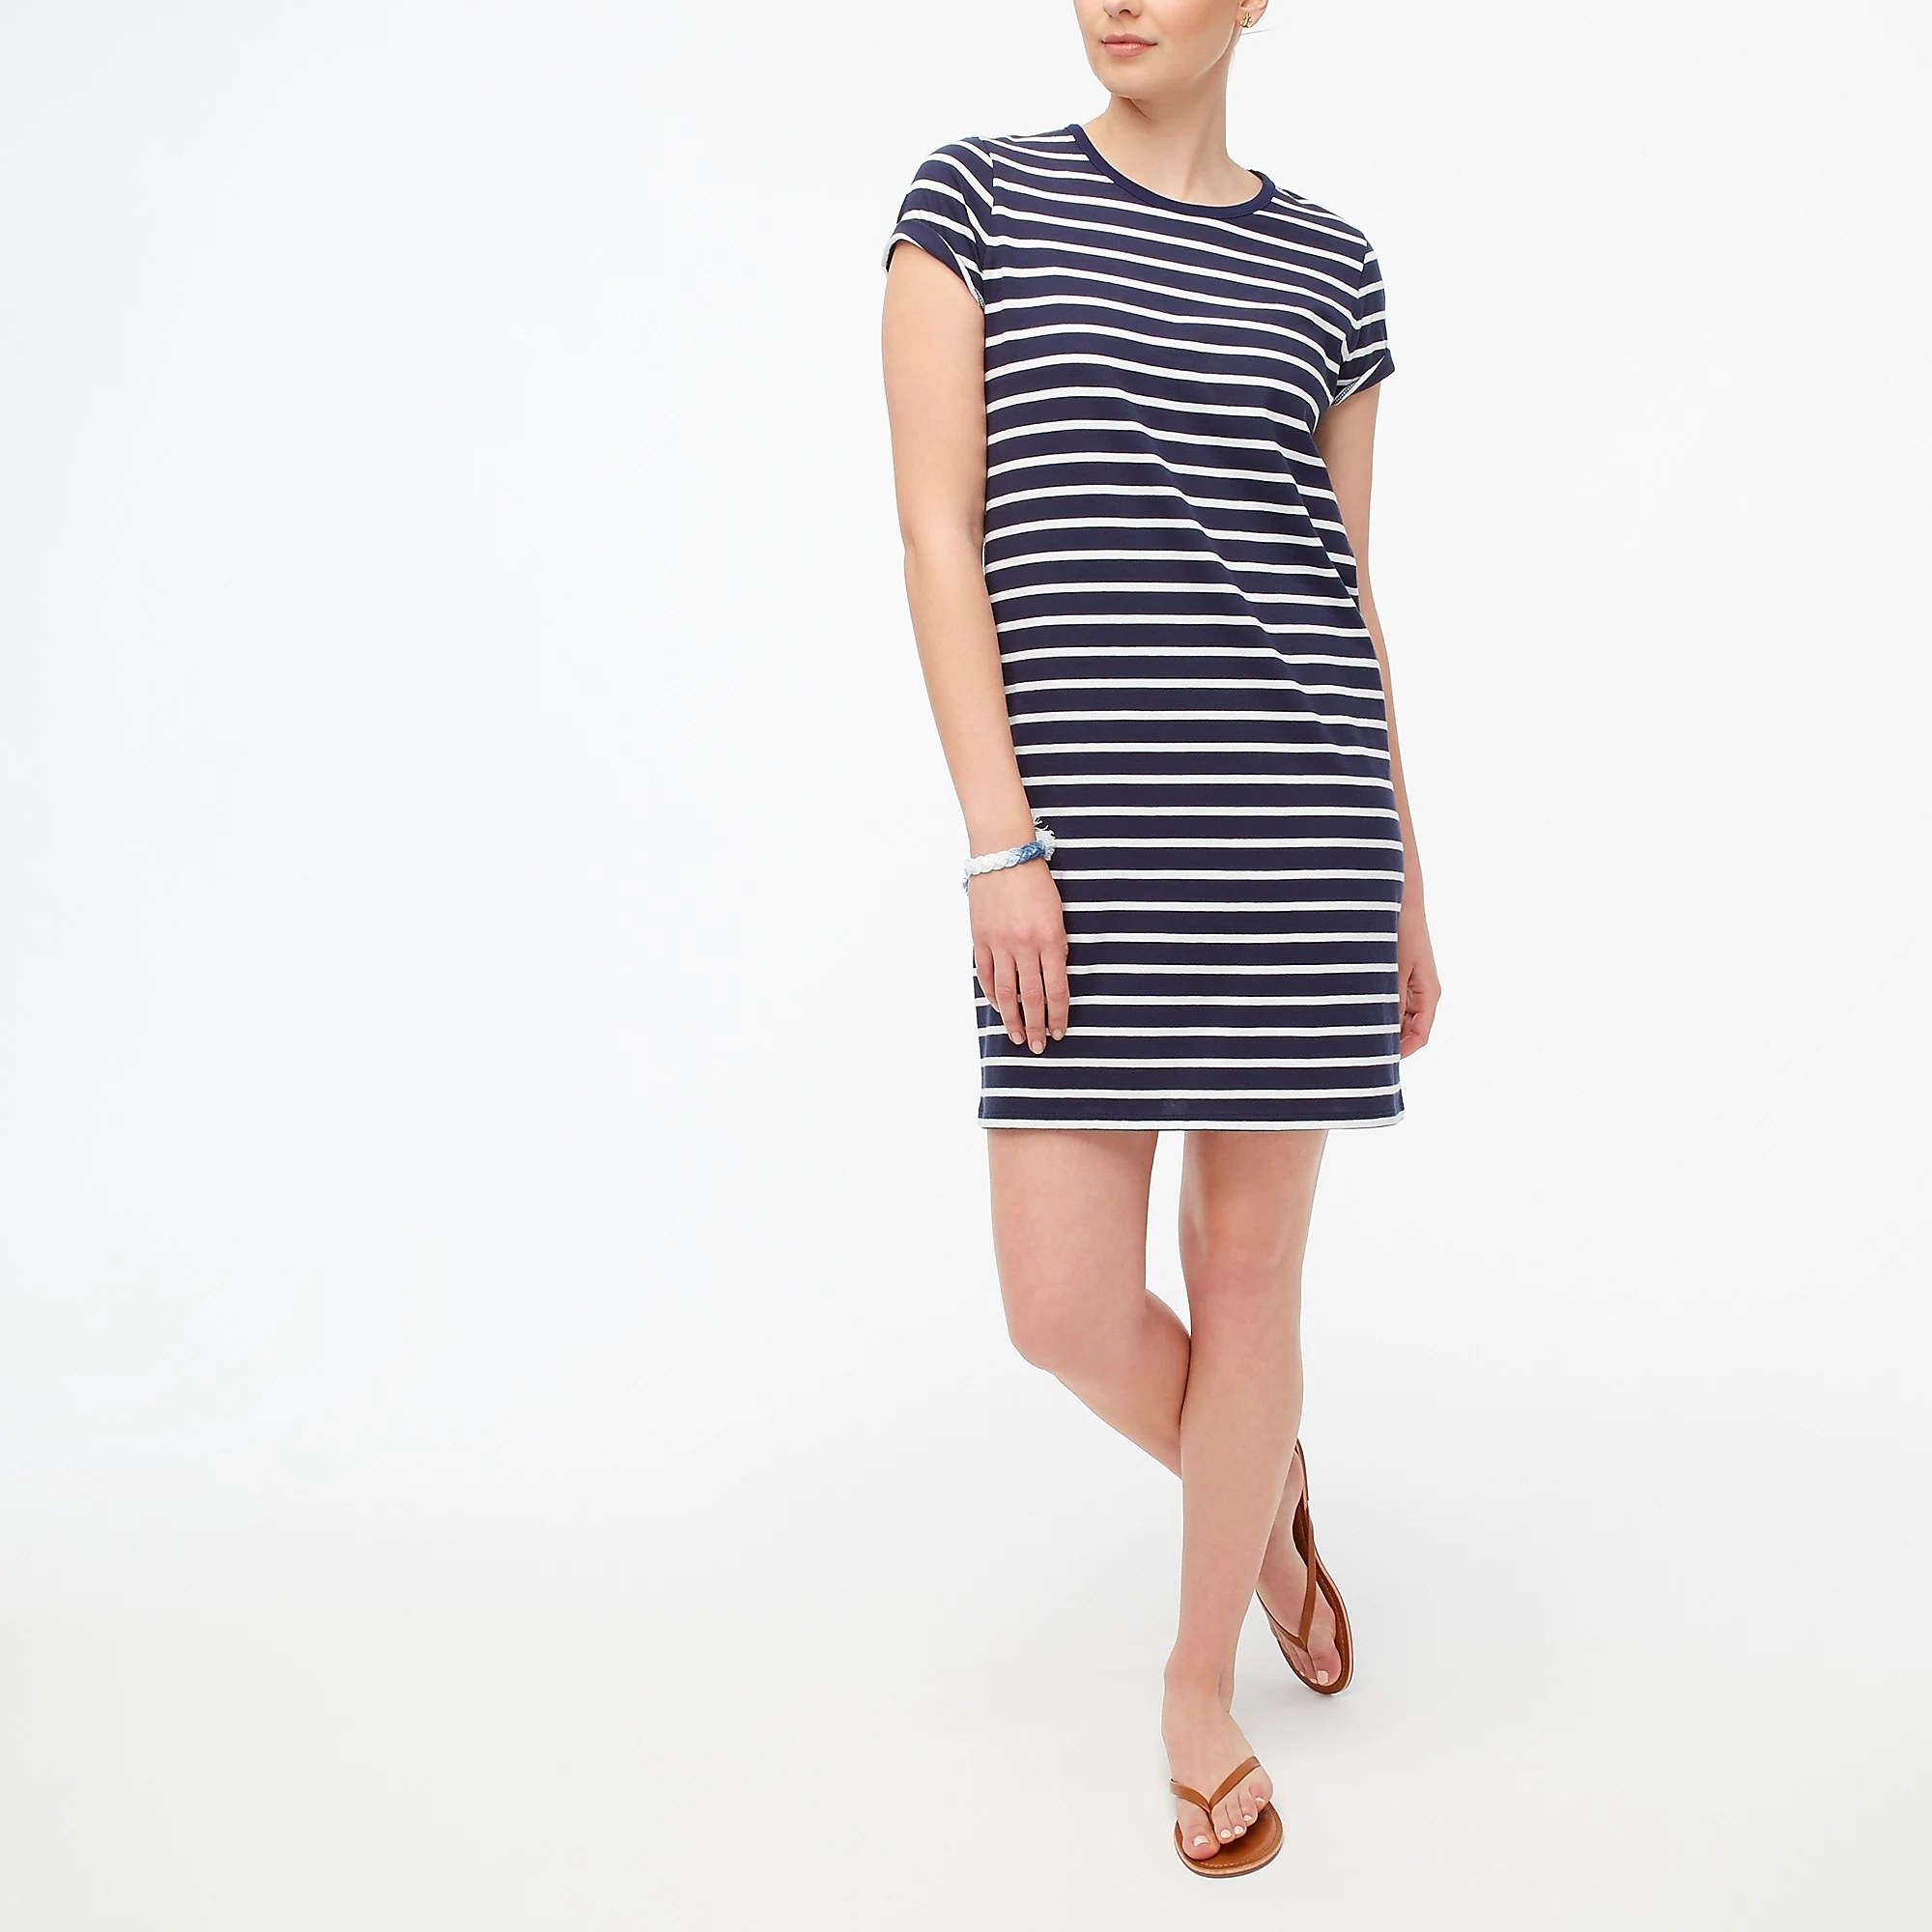 A model wearing the navy and white striped dress